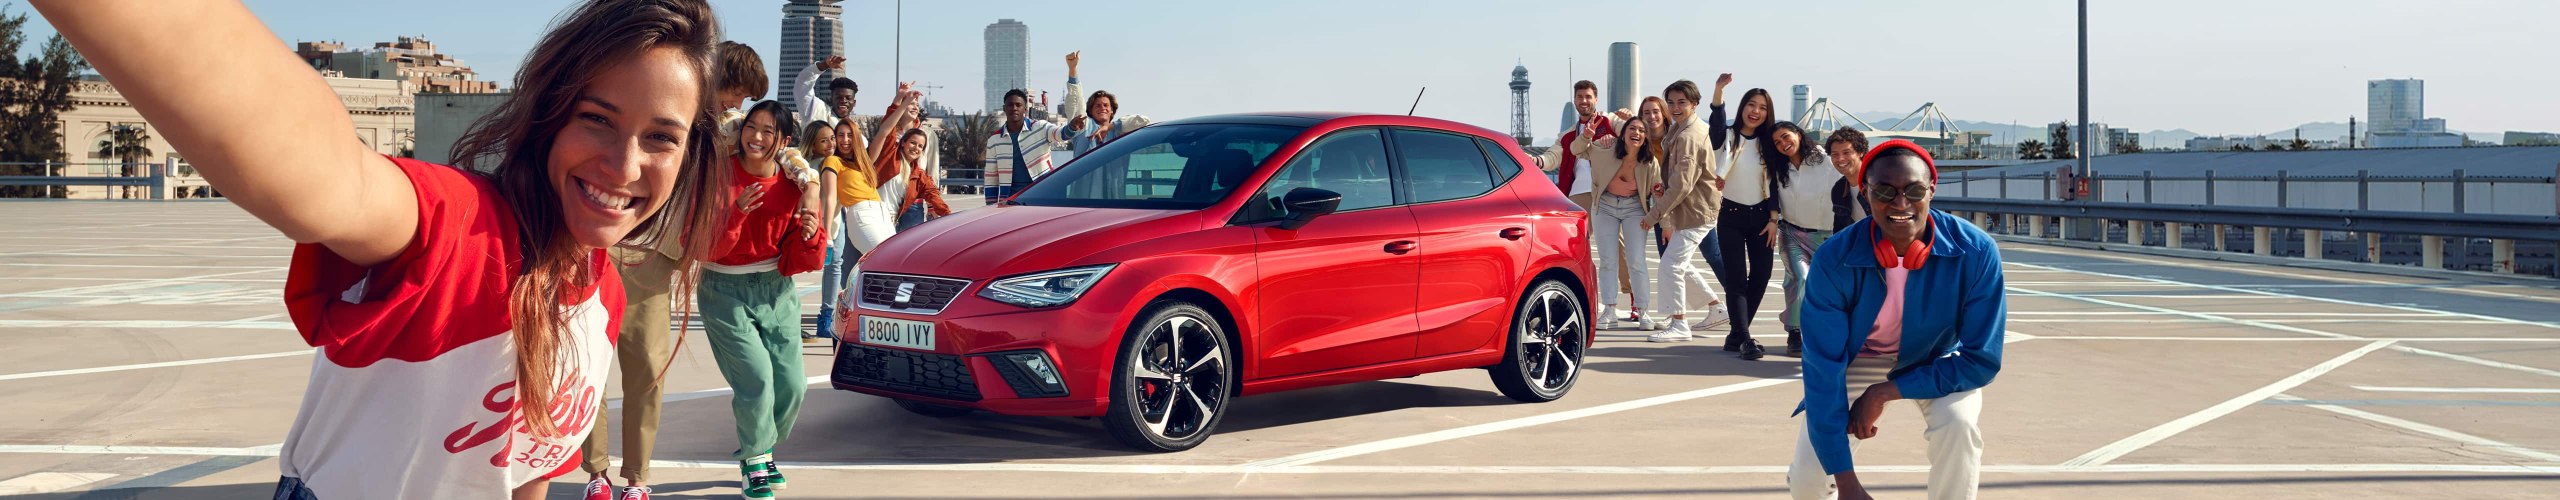 Party of friends with the SEAT Ibiza desire red colour in the middle